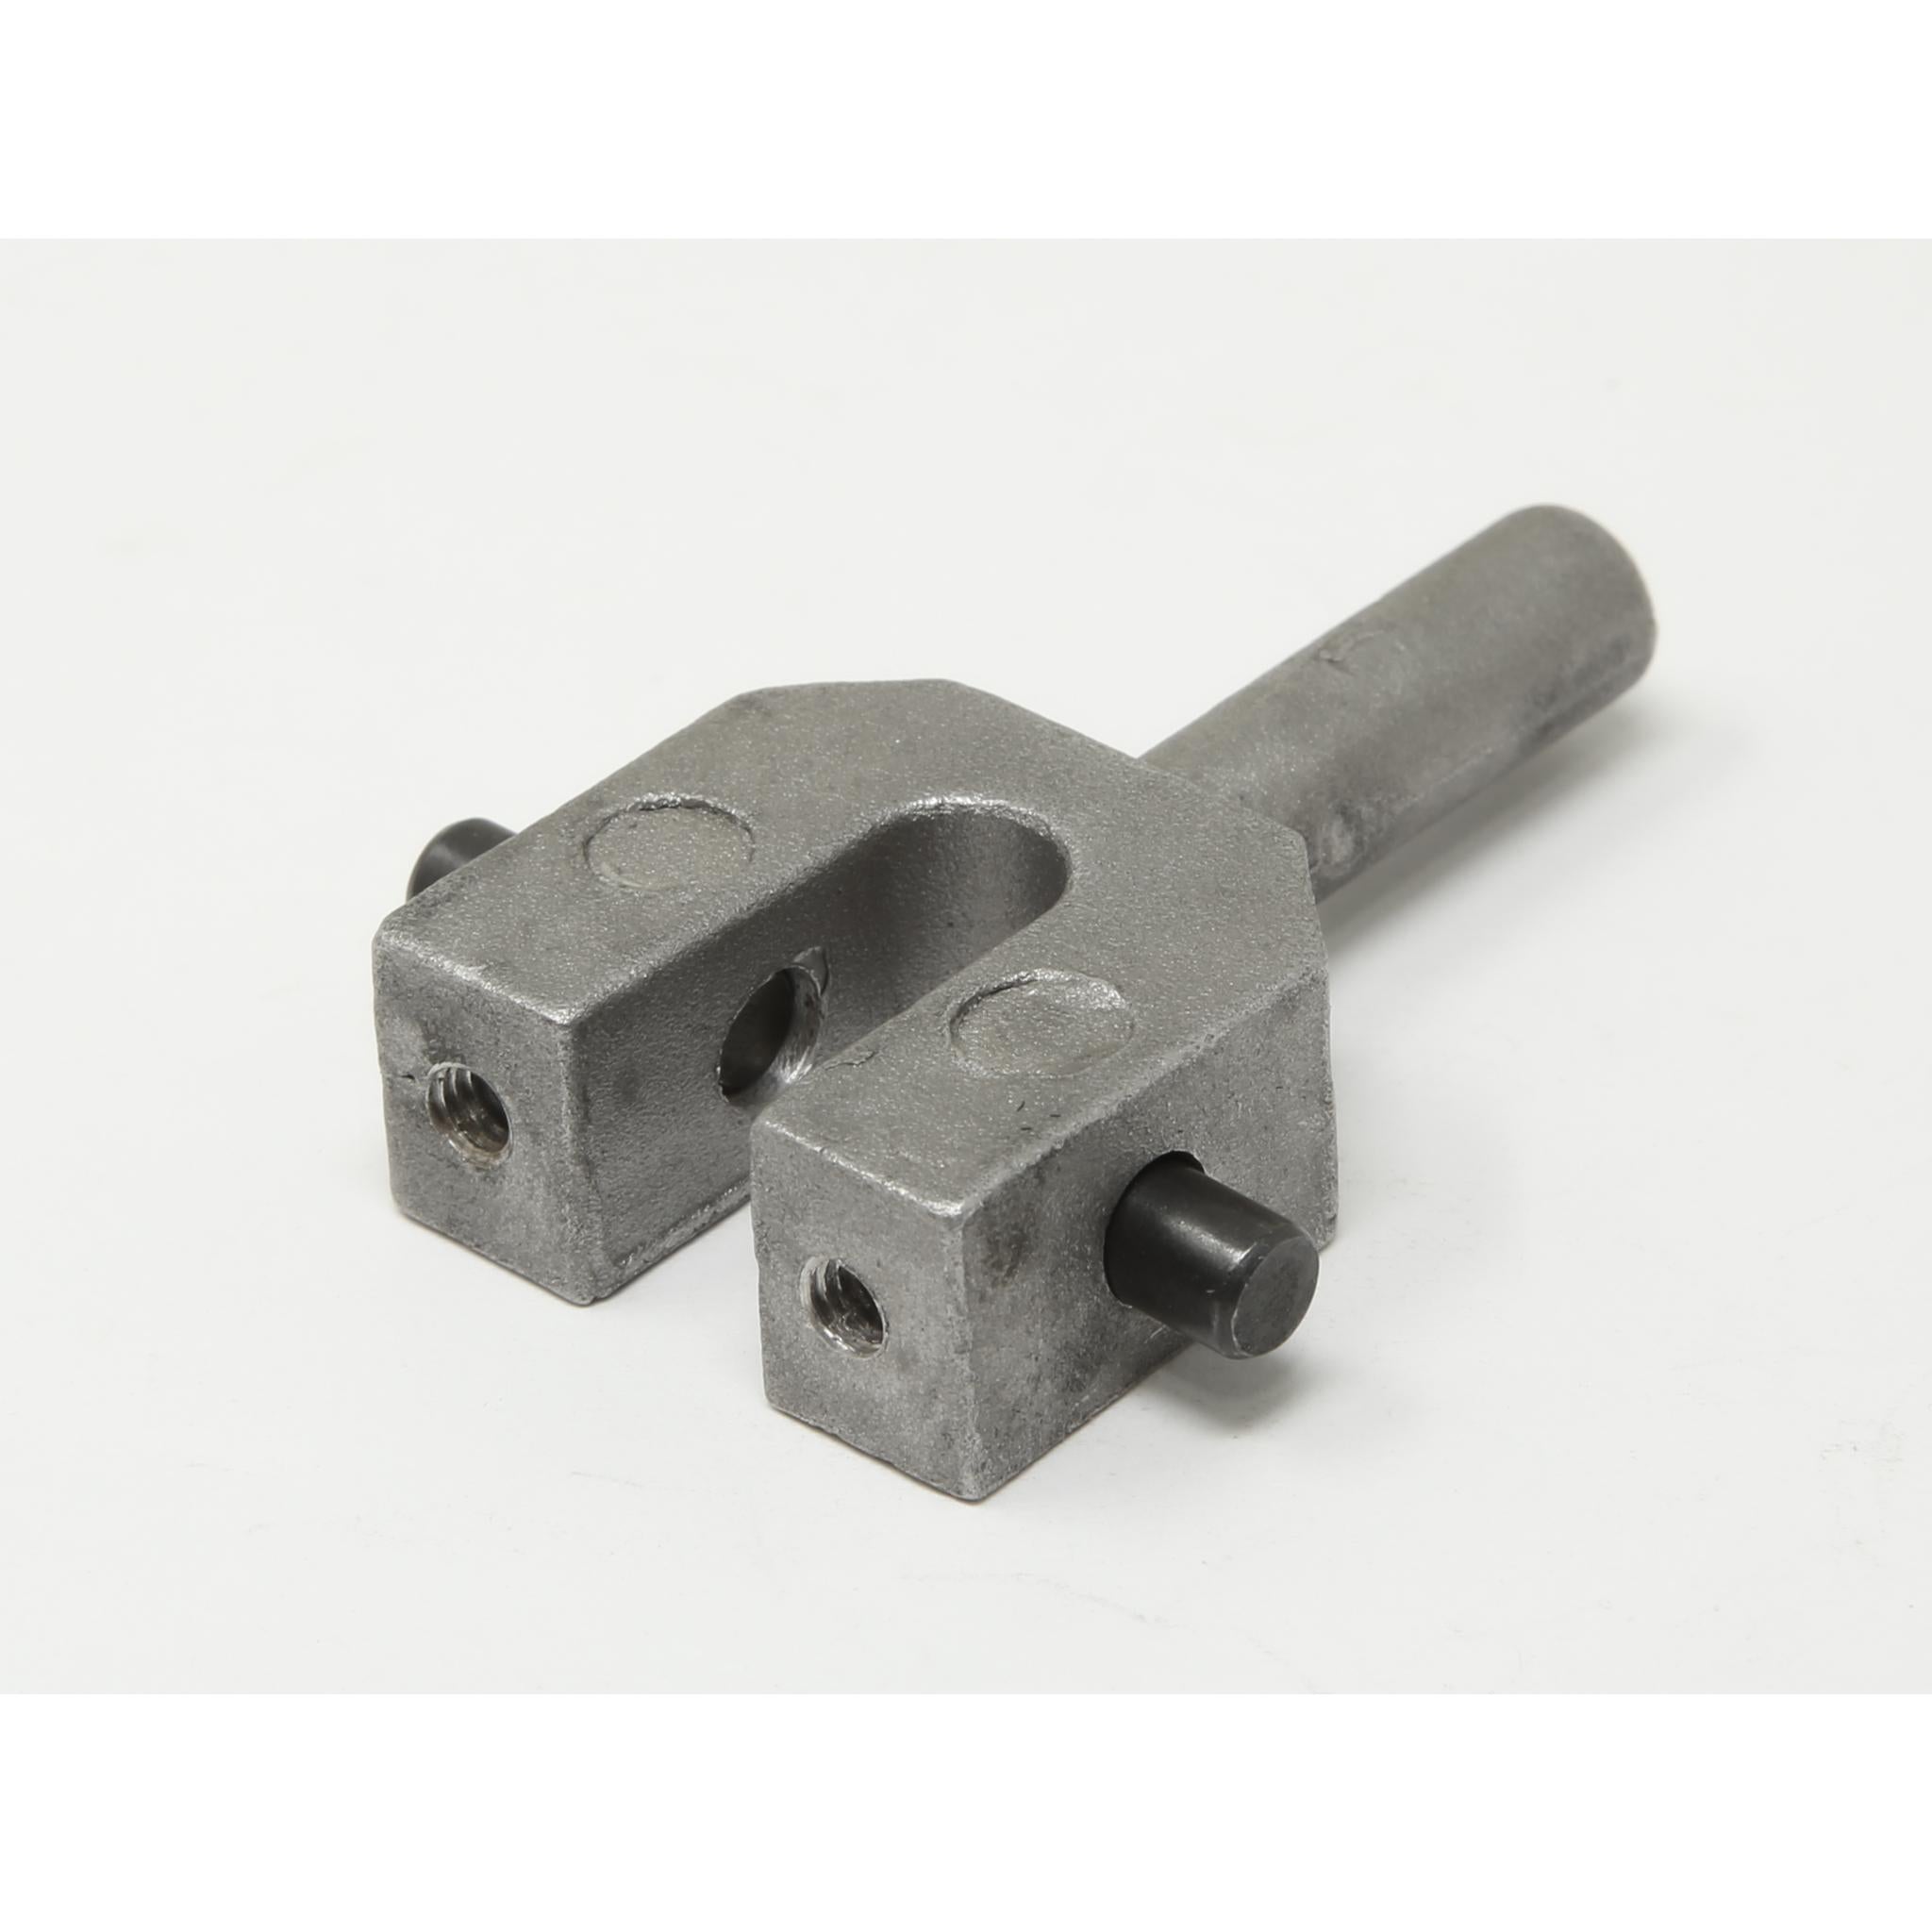 [3959-100ASM] Lower Blade Guide Support Assembly for WEN 3959